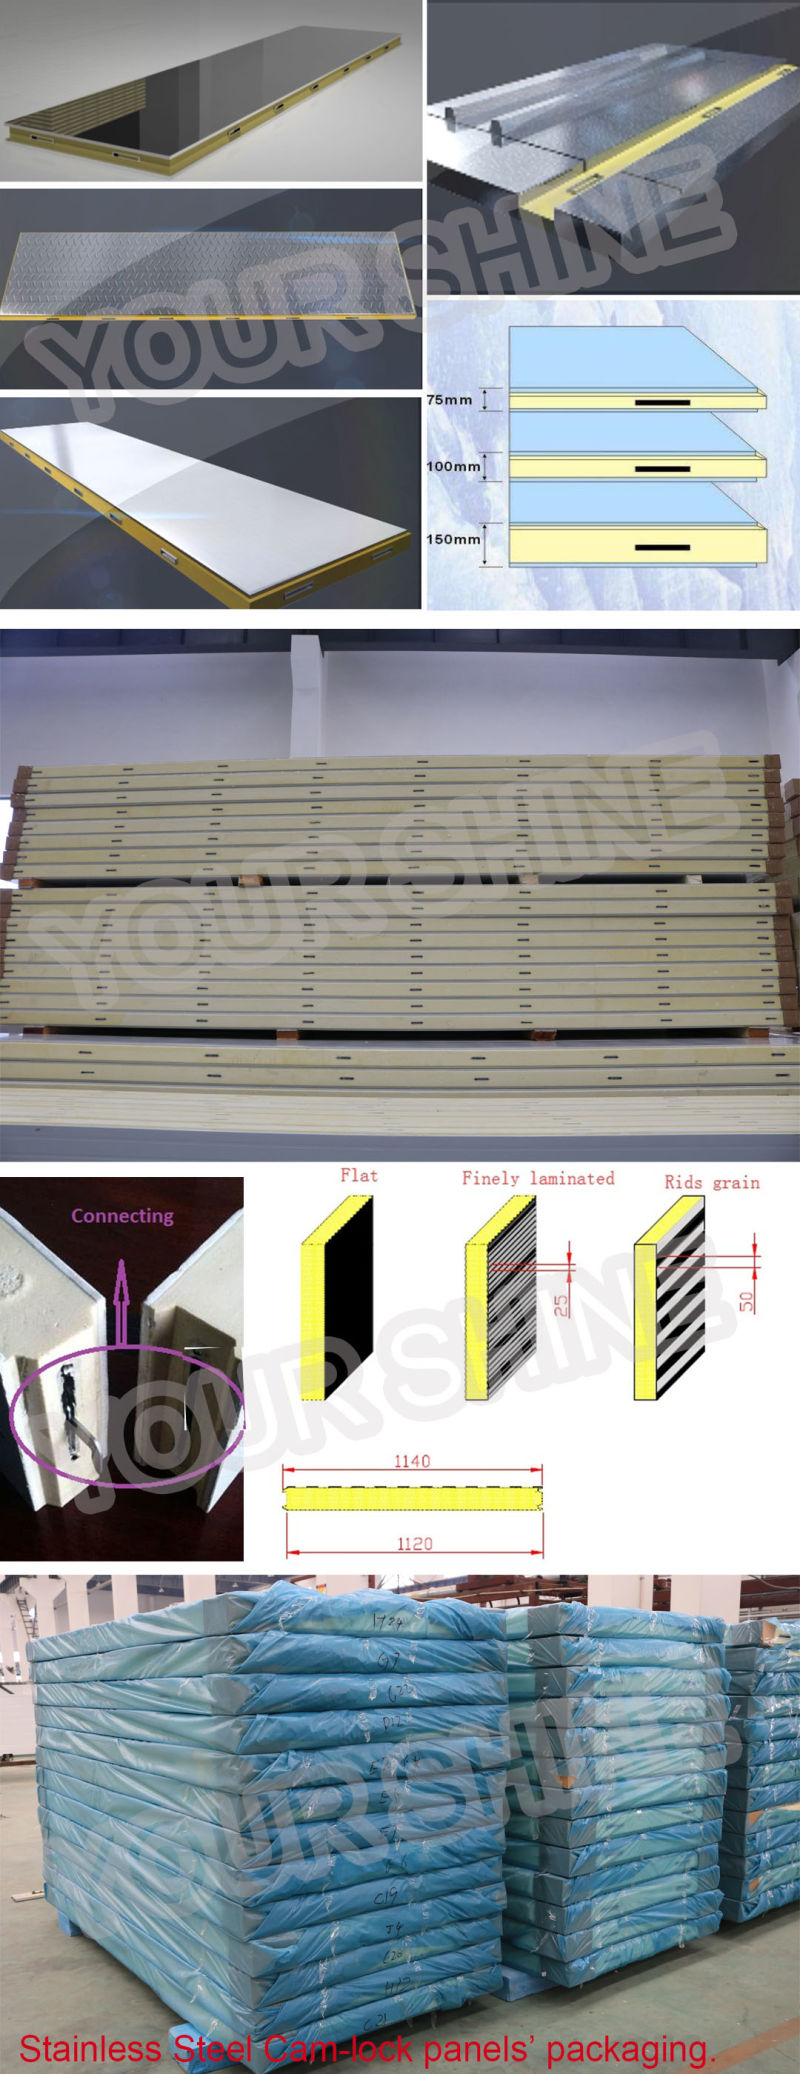 Polyurethane Foam Insulated Sandwich Panels Prices, Second Hand Cold Room Panels, Heat Insulation PU Panel Coolroom Panels